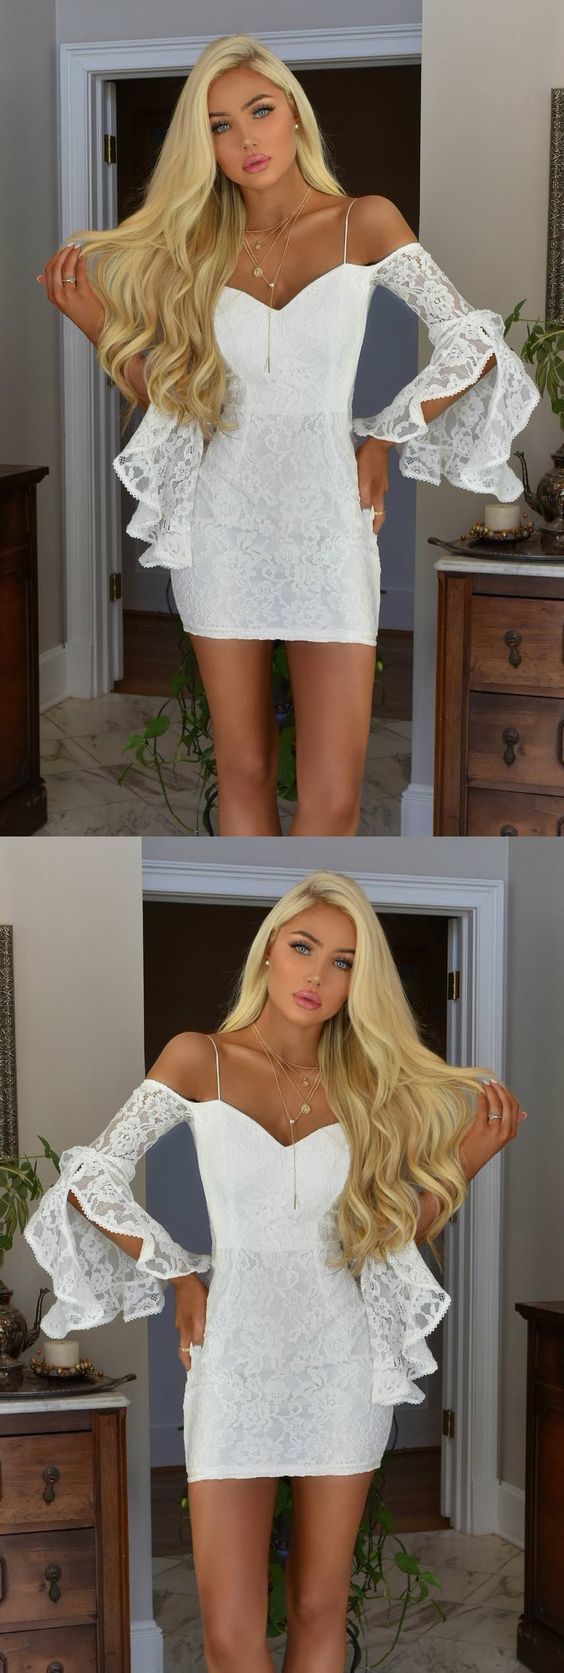 Sheath Off-the-Shoulder Bell Sleeves Short White Lace Homecoming Cocktail Dress CD4588